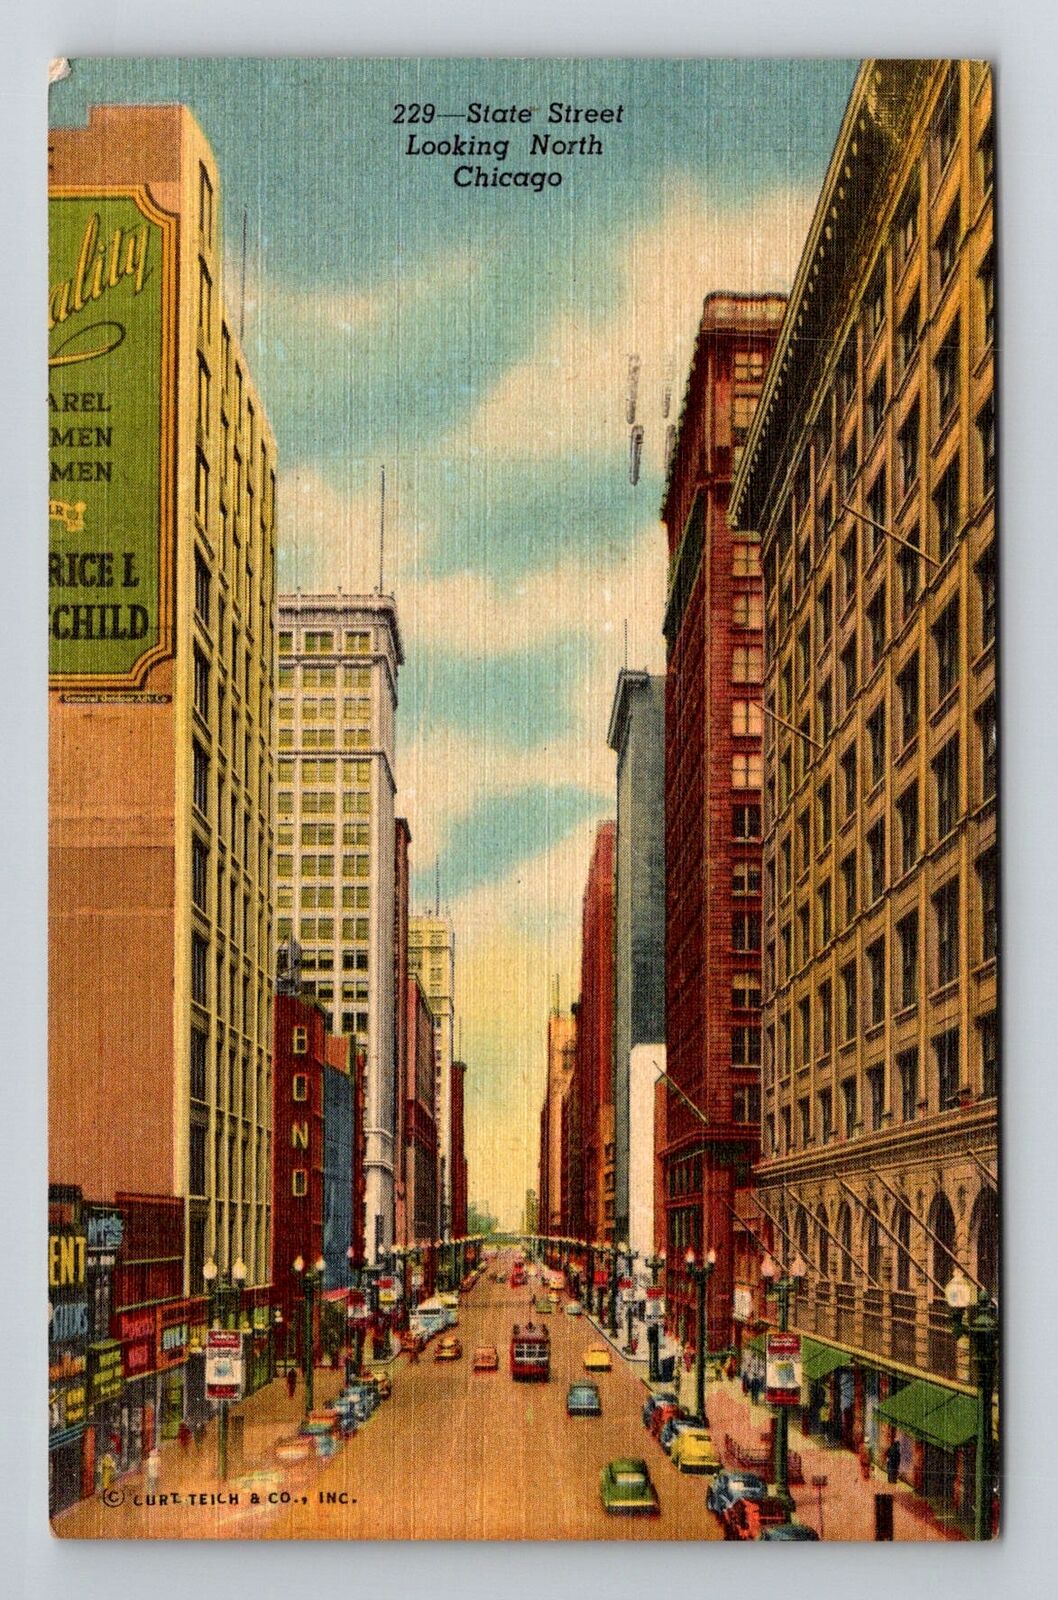 Chicago, IL-Illinois, State Street Looking North Shops c1952, Vintage Postcard